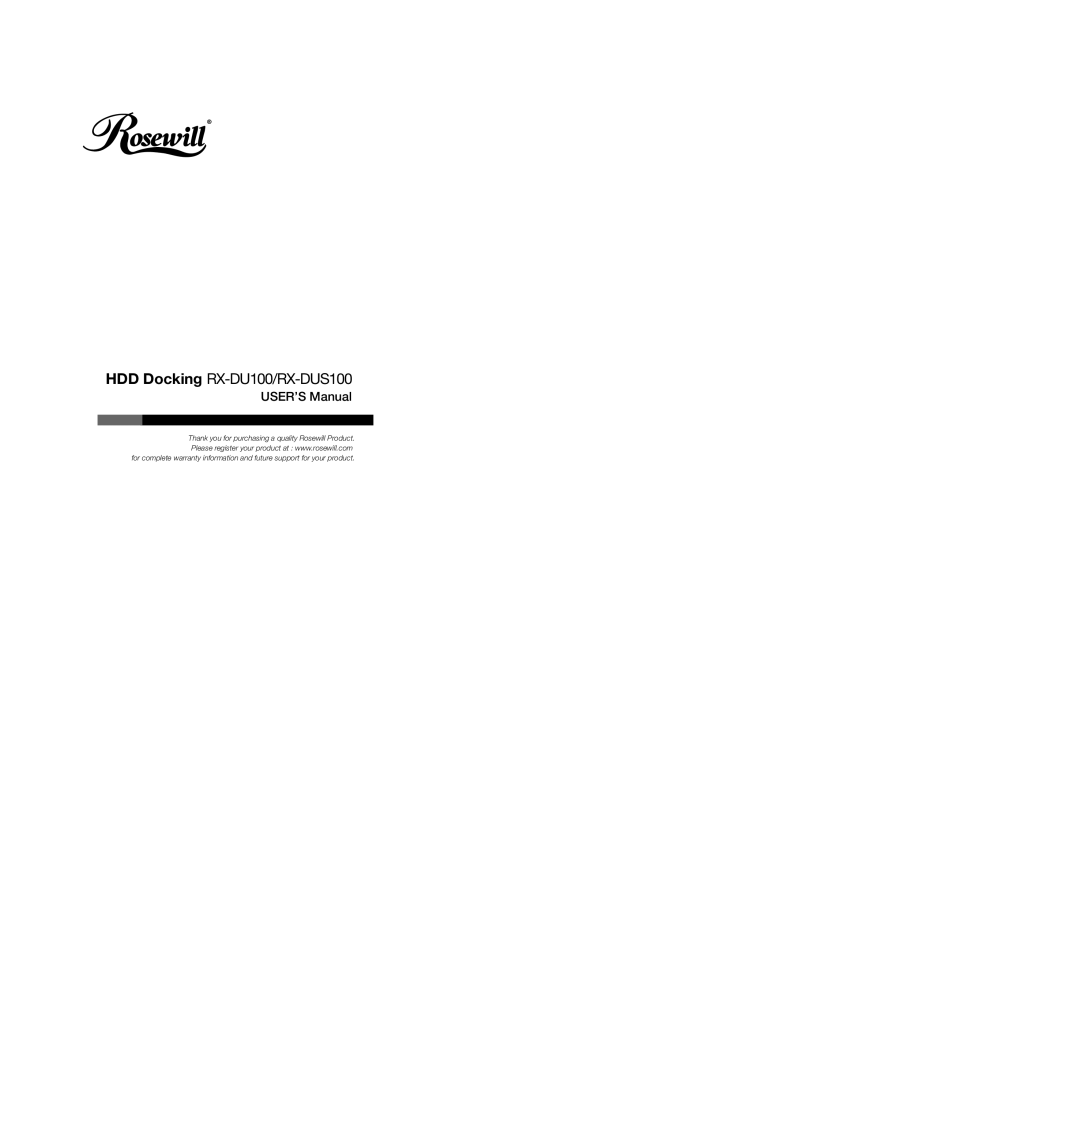 Rosewill user manual HDD Docking RX-DU100/RX-DUS100, USER’S Manual 